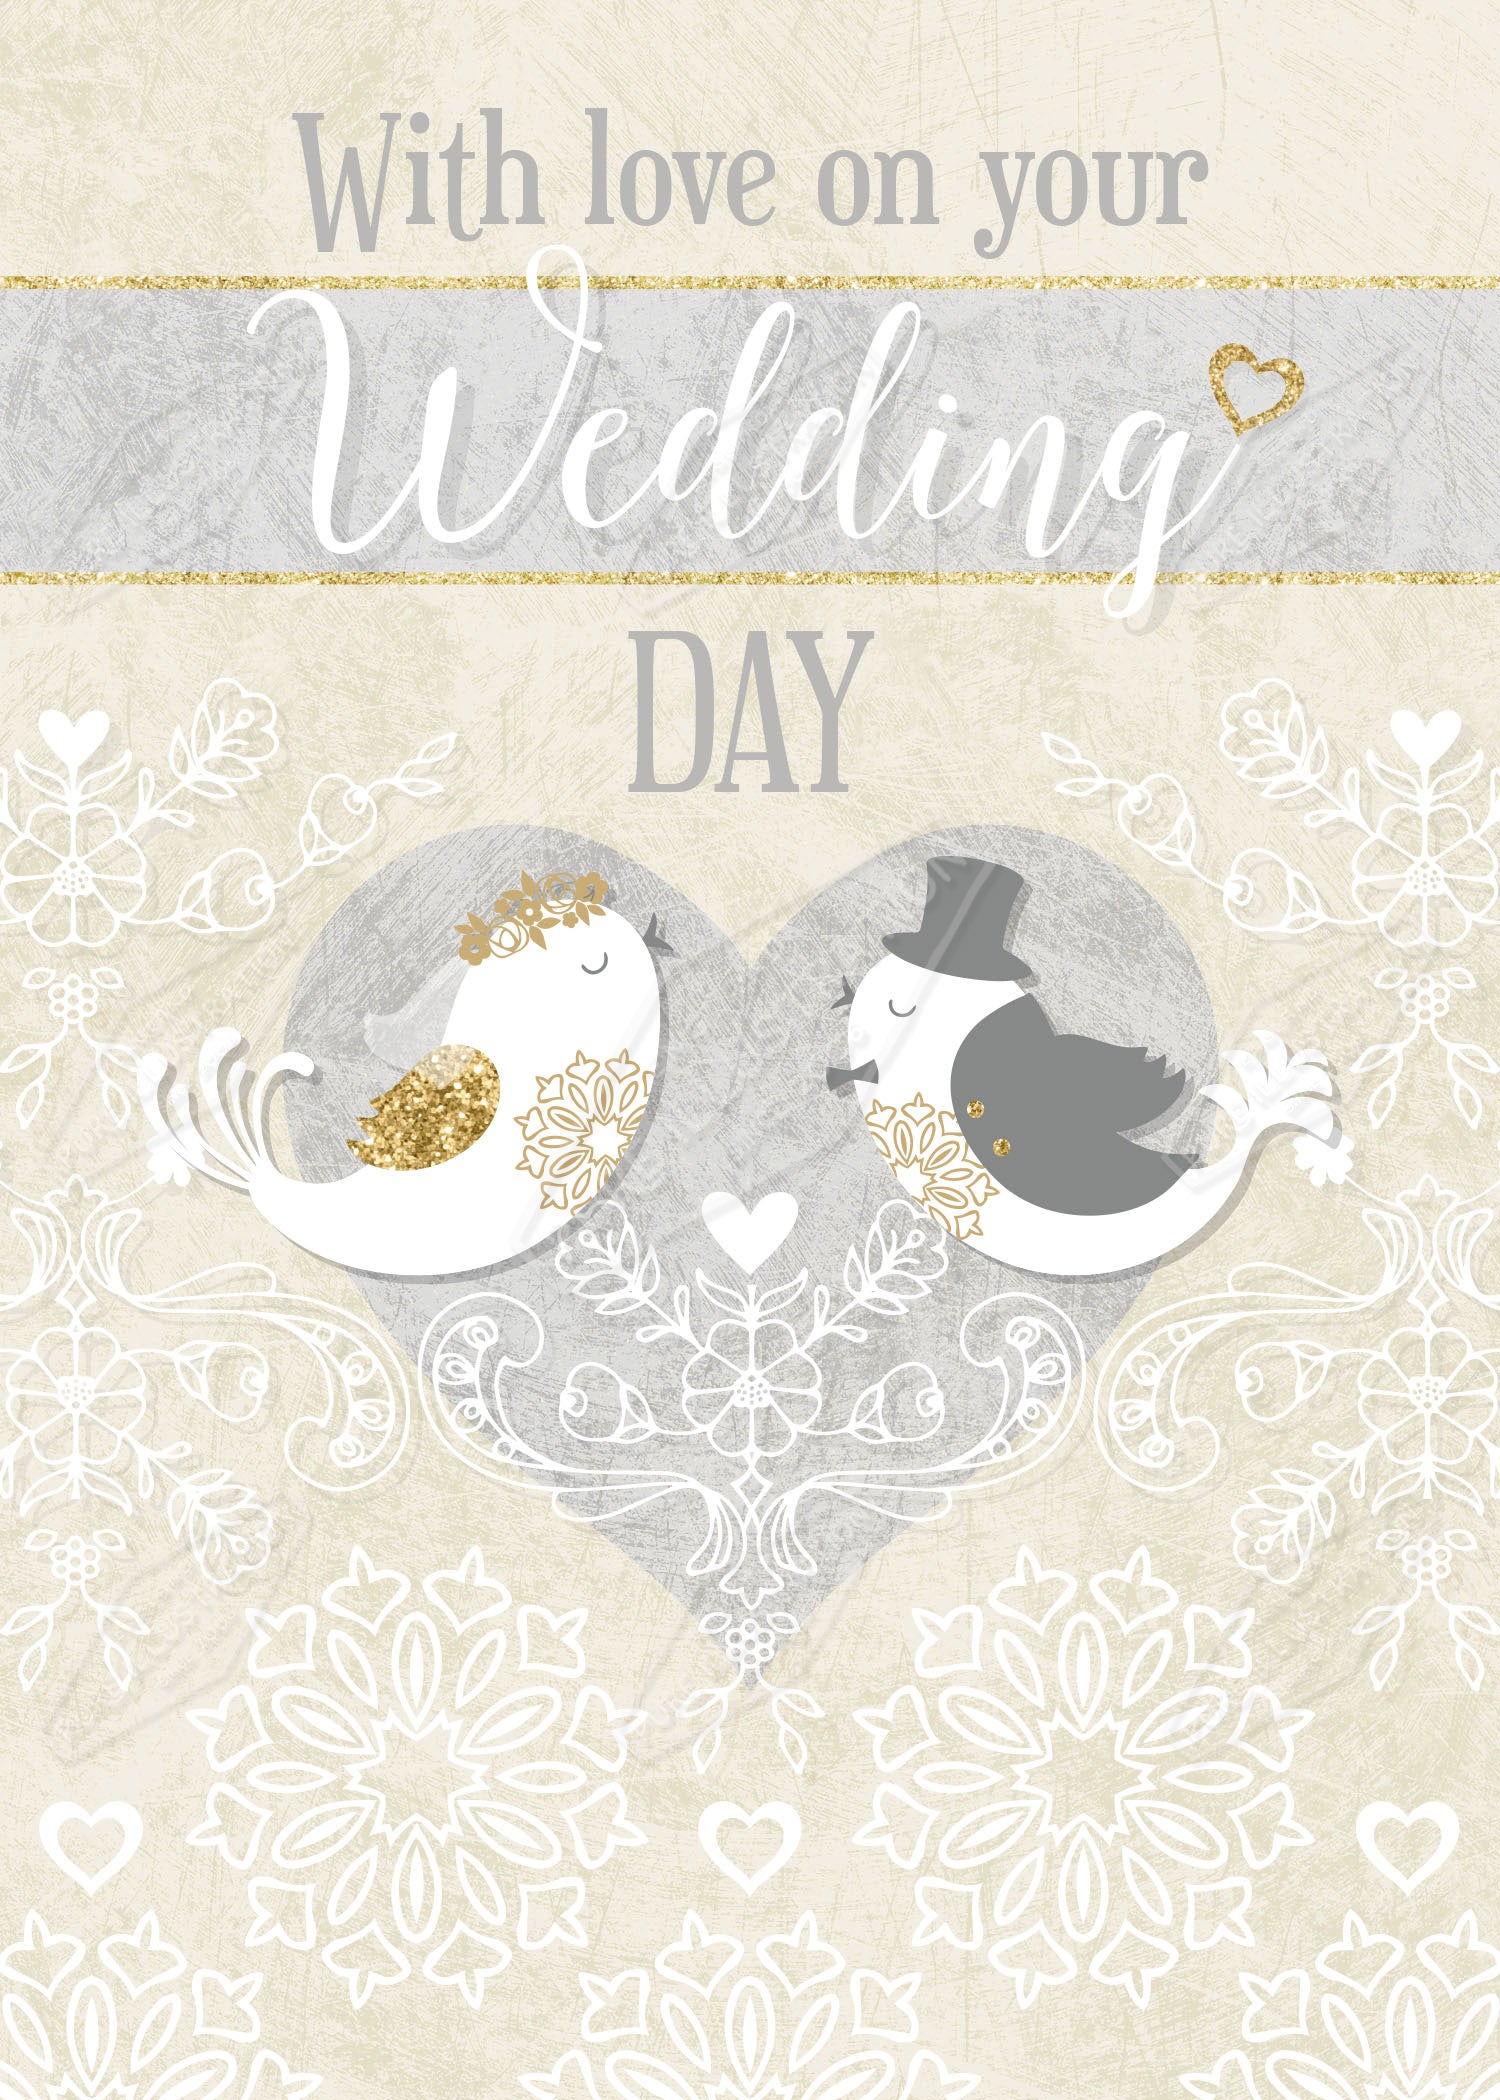 00034977GEG- Gill Eggleston is represented by Pure Art Licensing Agency - Wedding Greeting Card Design